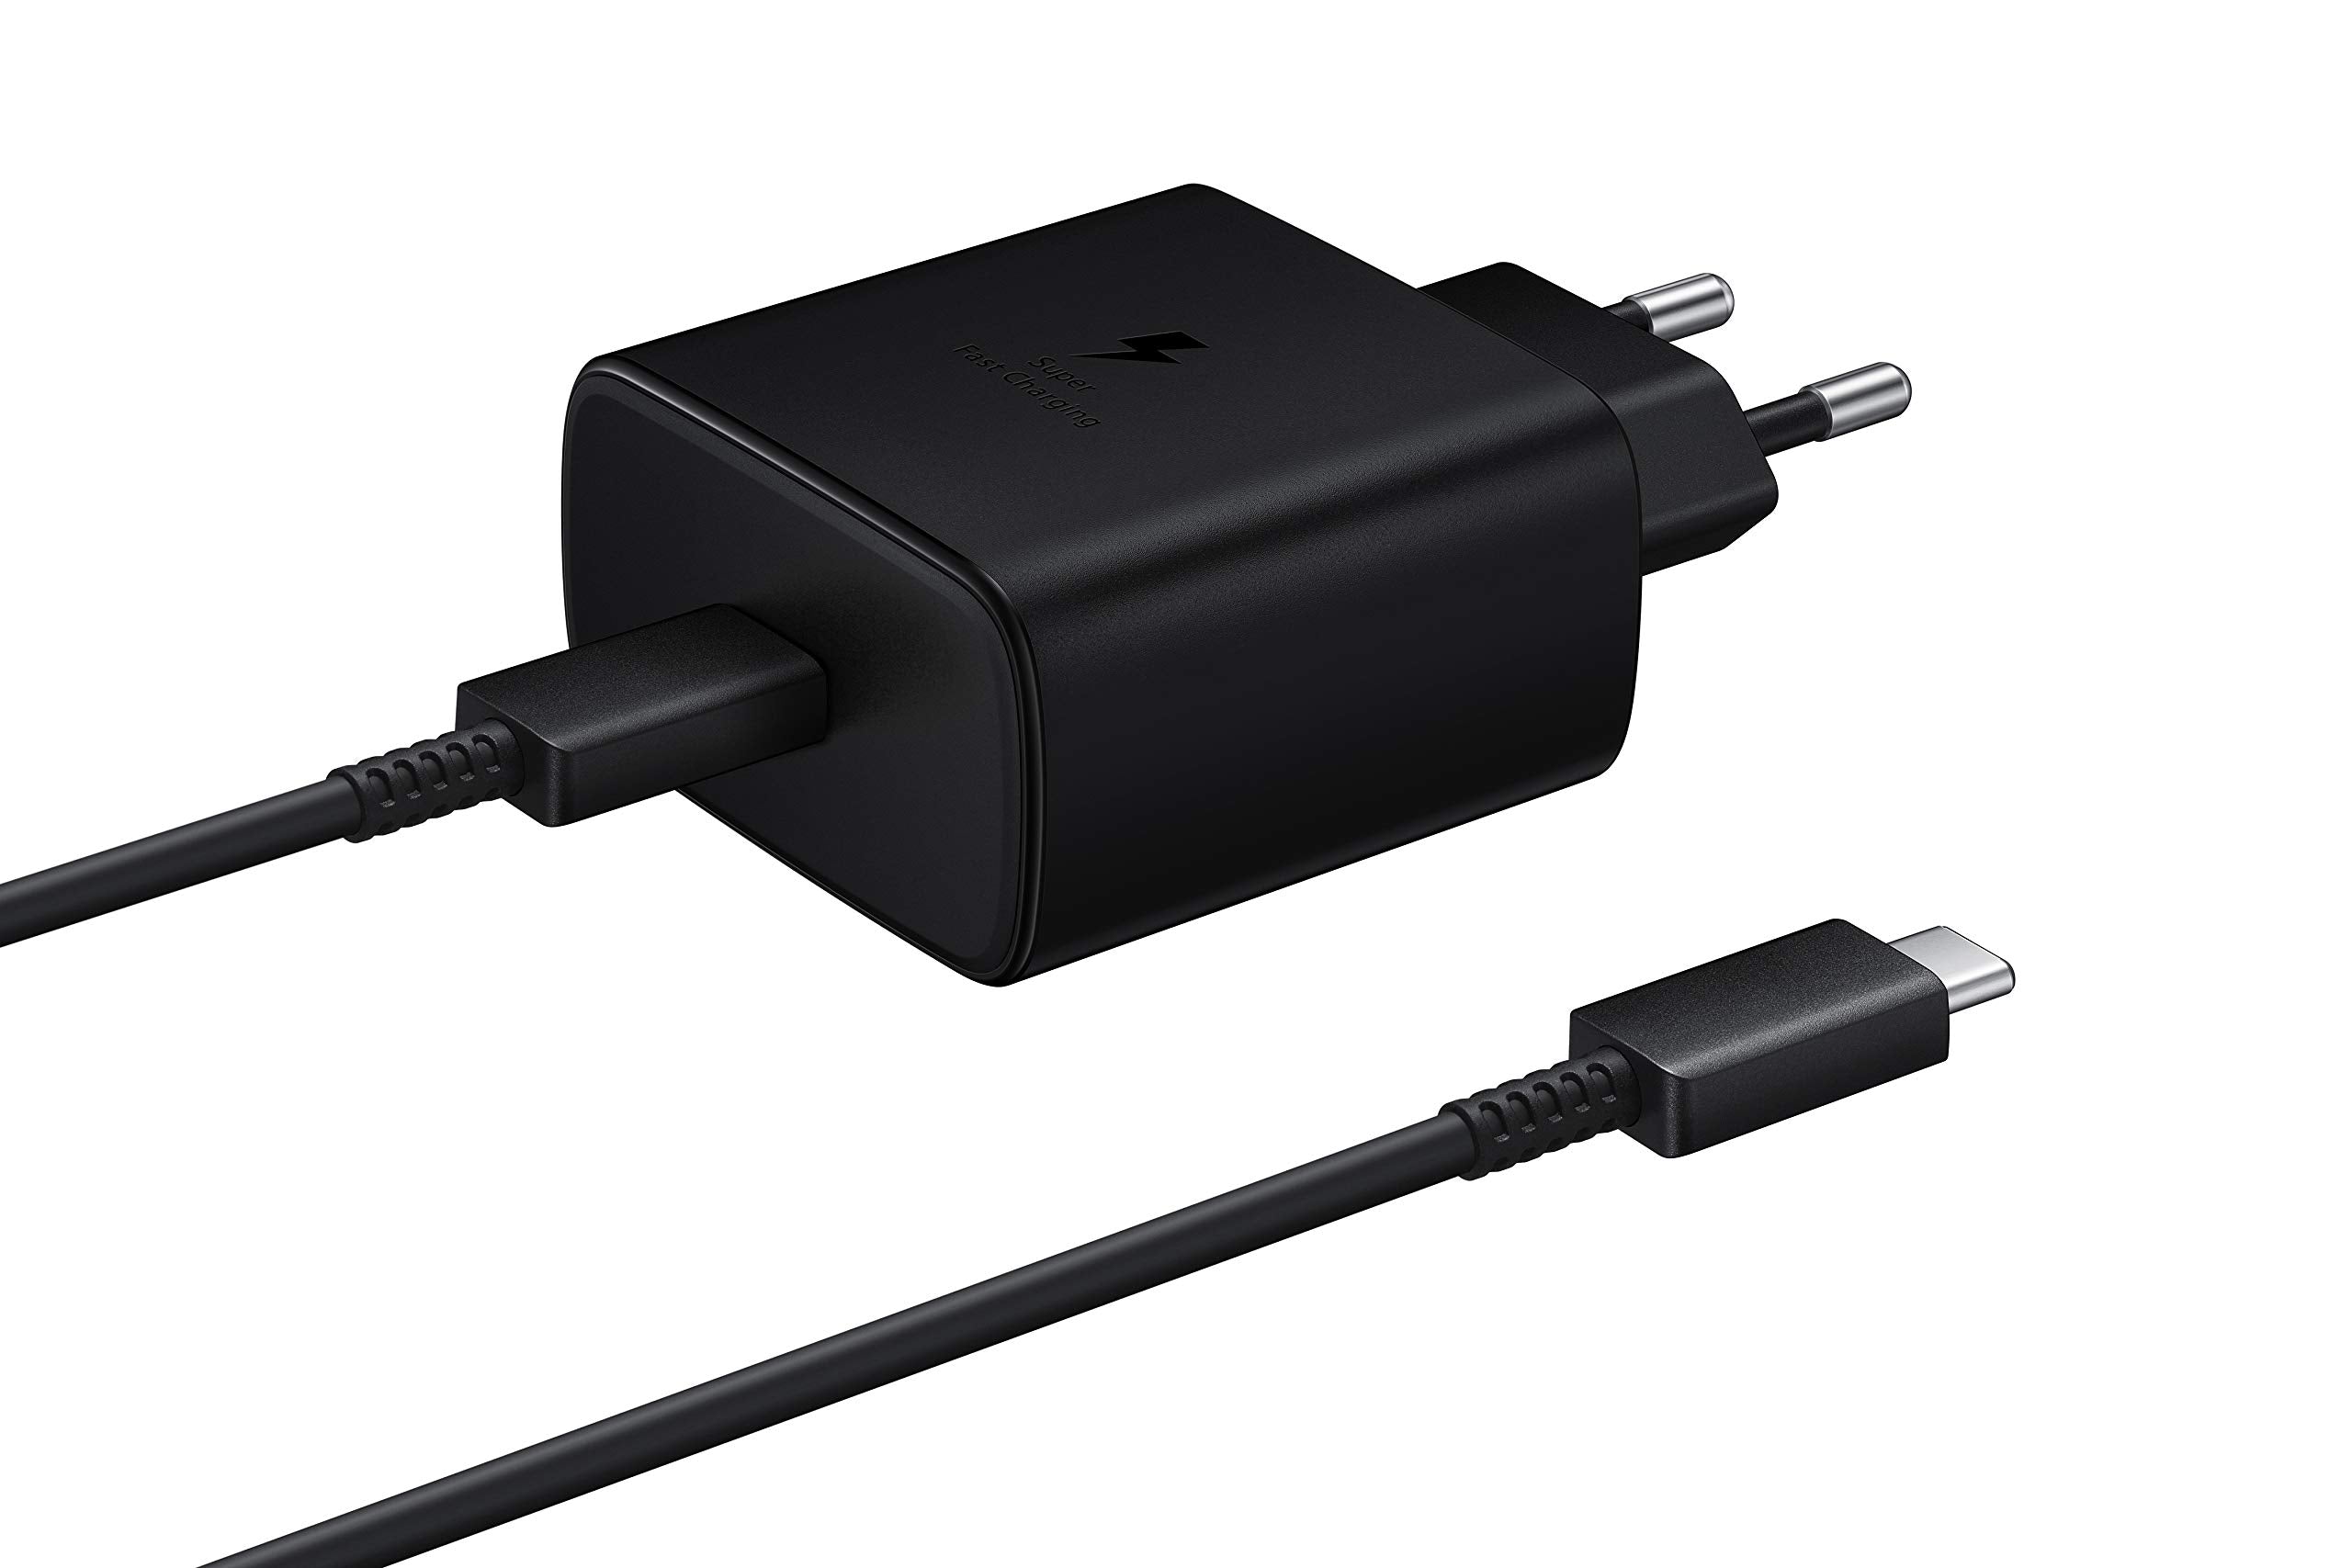 SAMSUNG 45W PD POWER ADAPTER 2 PIN WITH CABLE